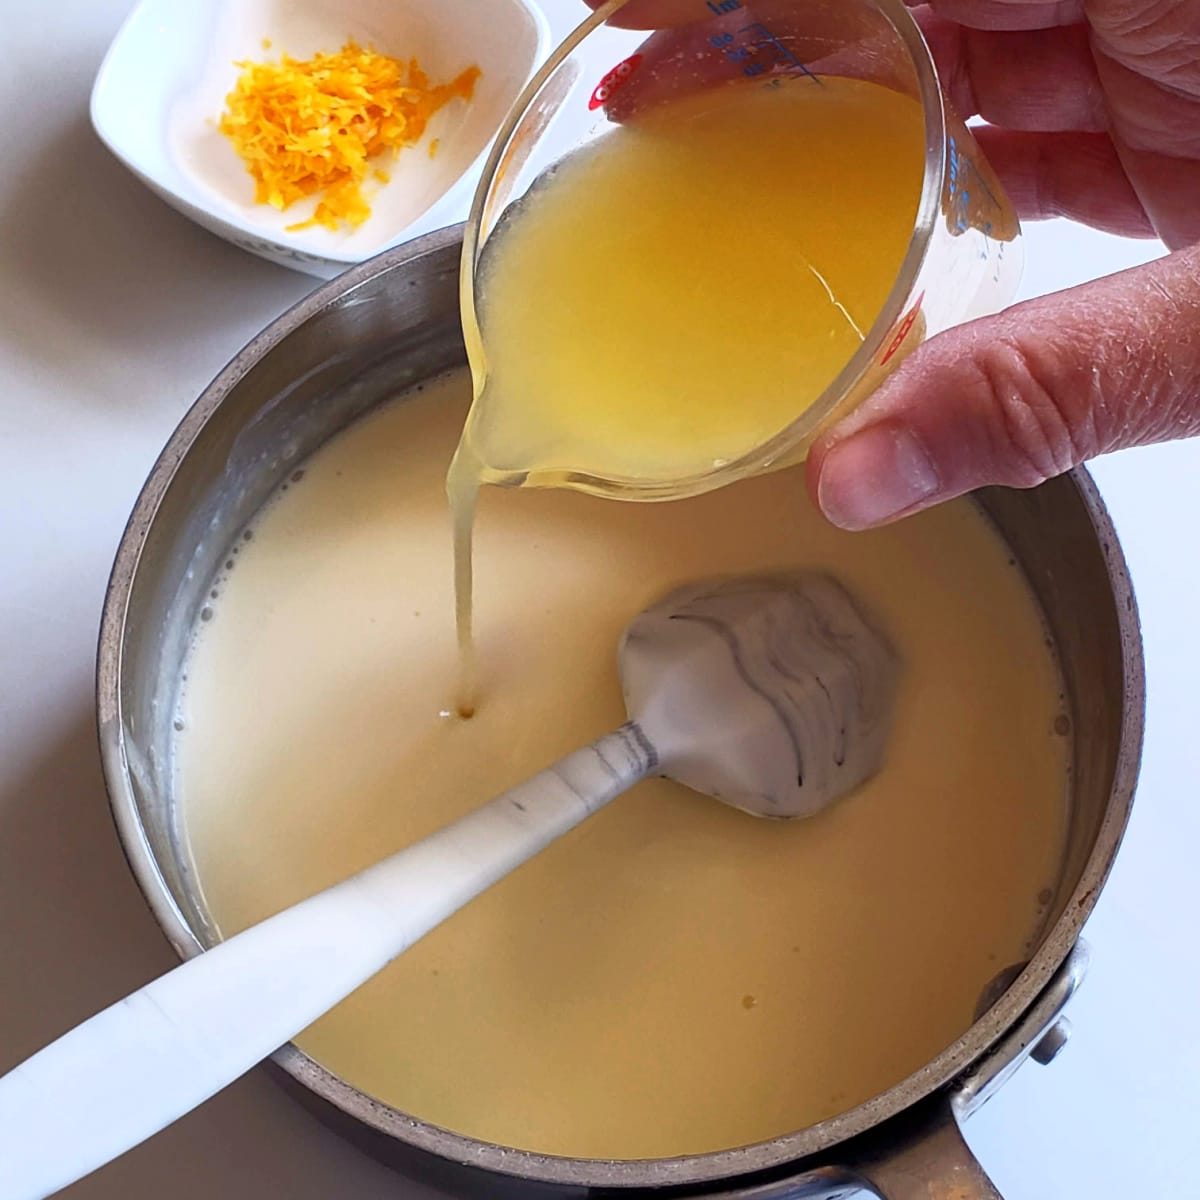 A hand pours lemon juice from a small measuring cup into liquid in a silver pan, with a white bowl of lemon zest in the background